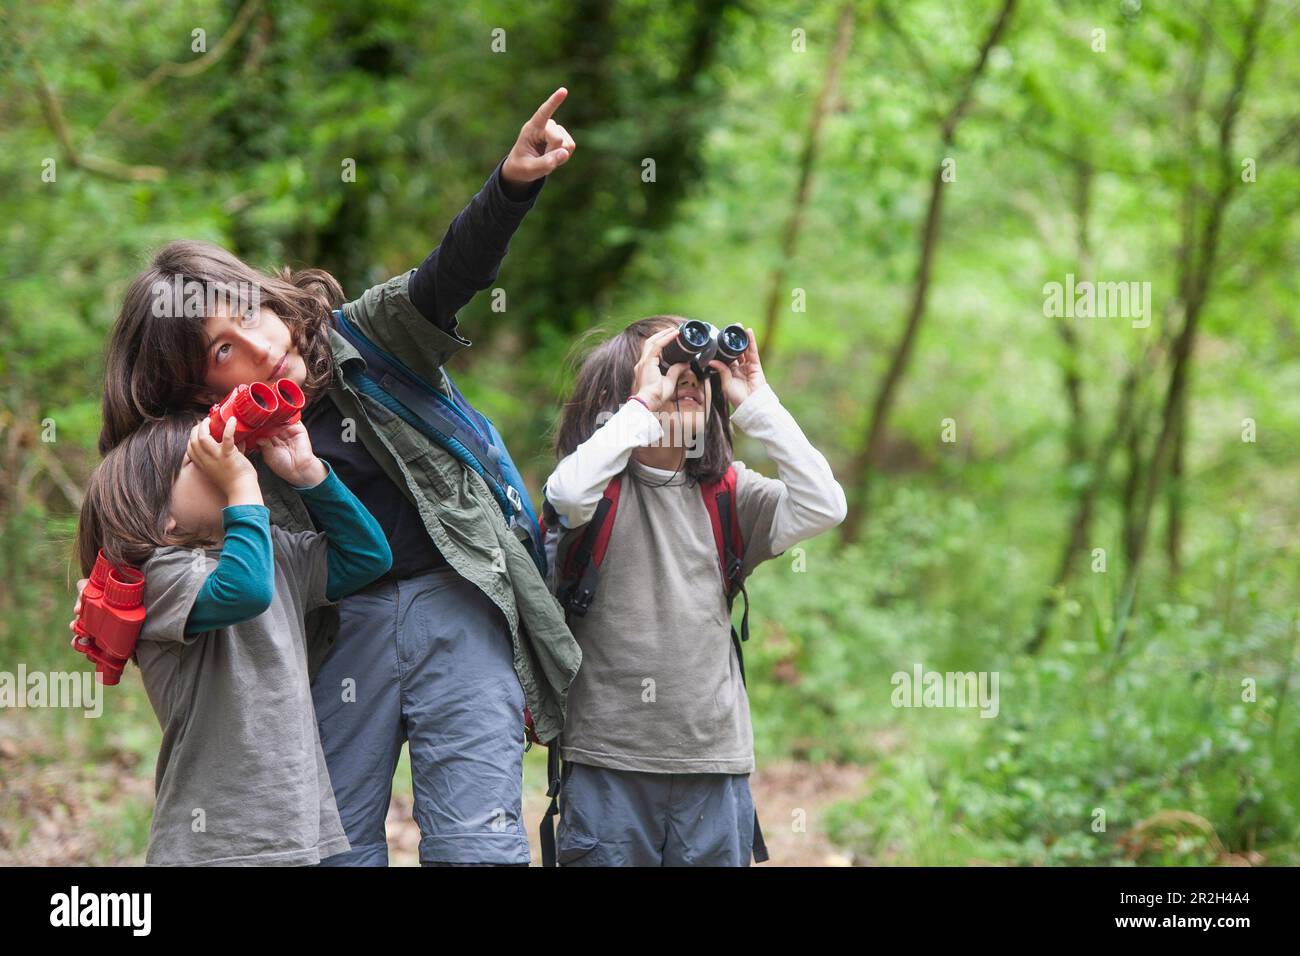 Three brothers, equipped with binoculars, are exploring the forest together. The older brother is guiding and assisting the two younger ones in their Stock Photo